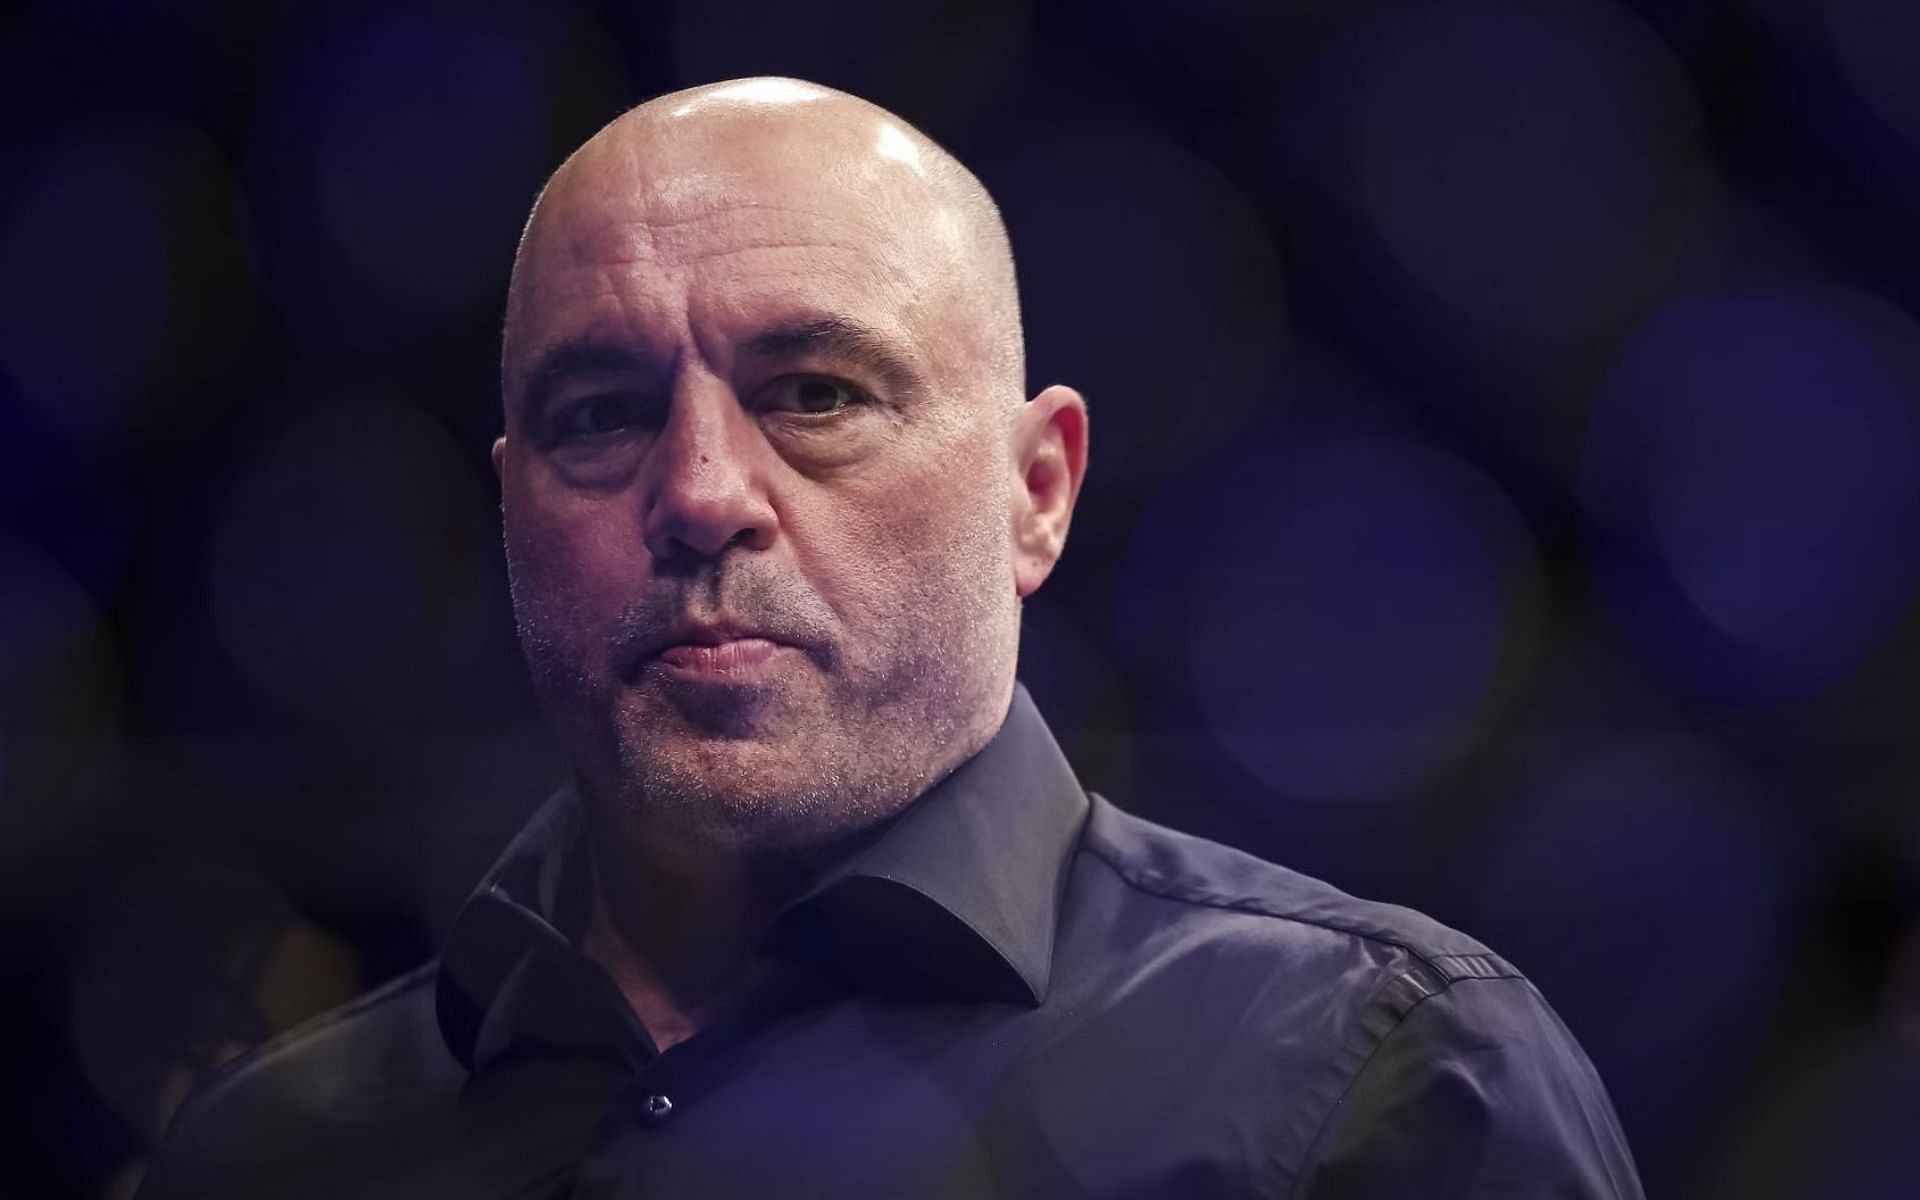 Joe Rogan states that alcohol will damage a fighter